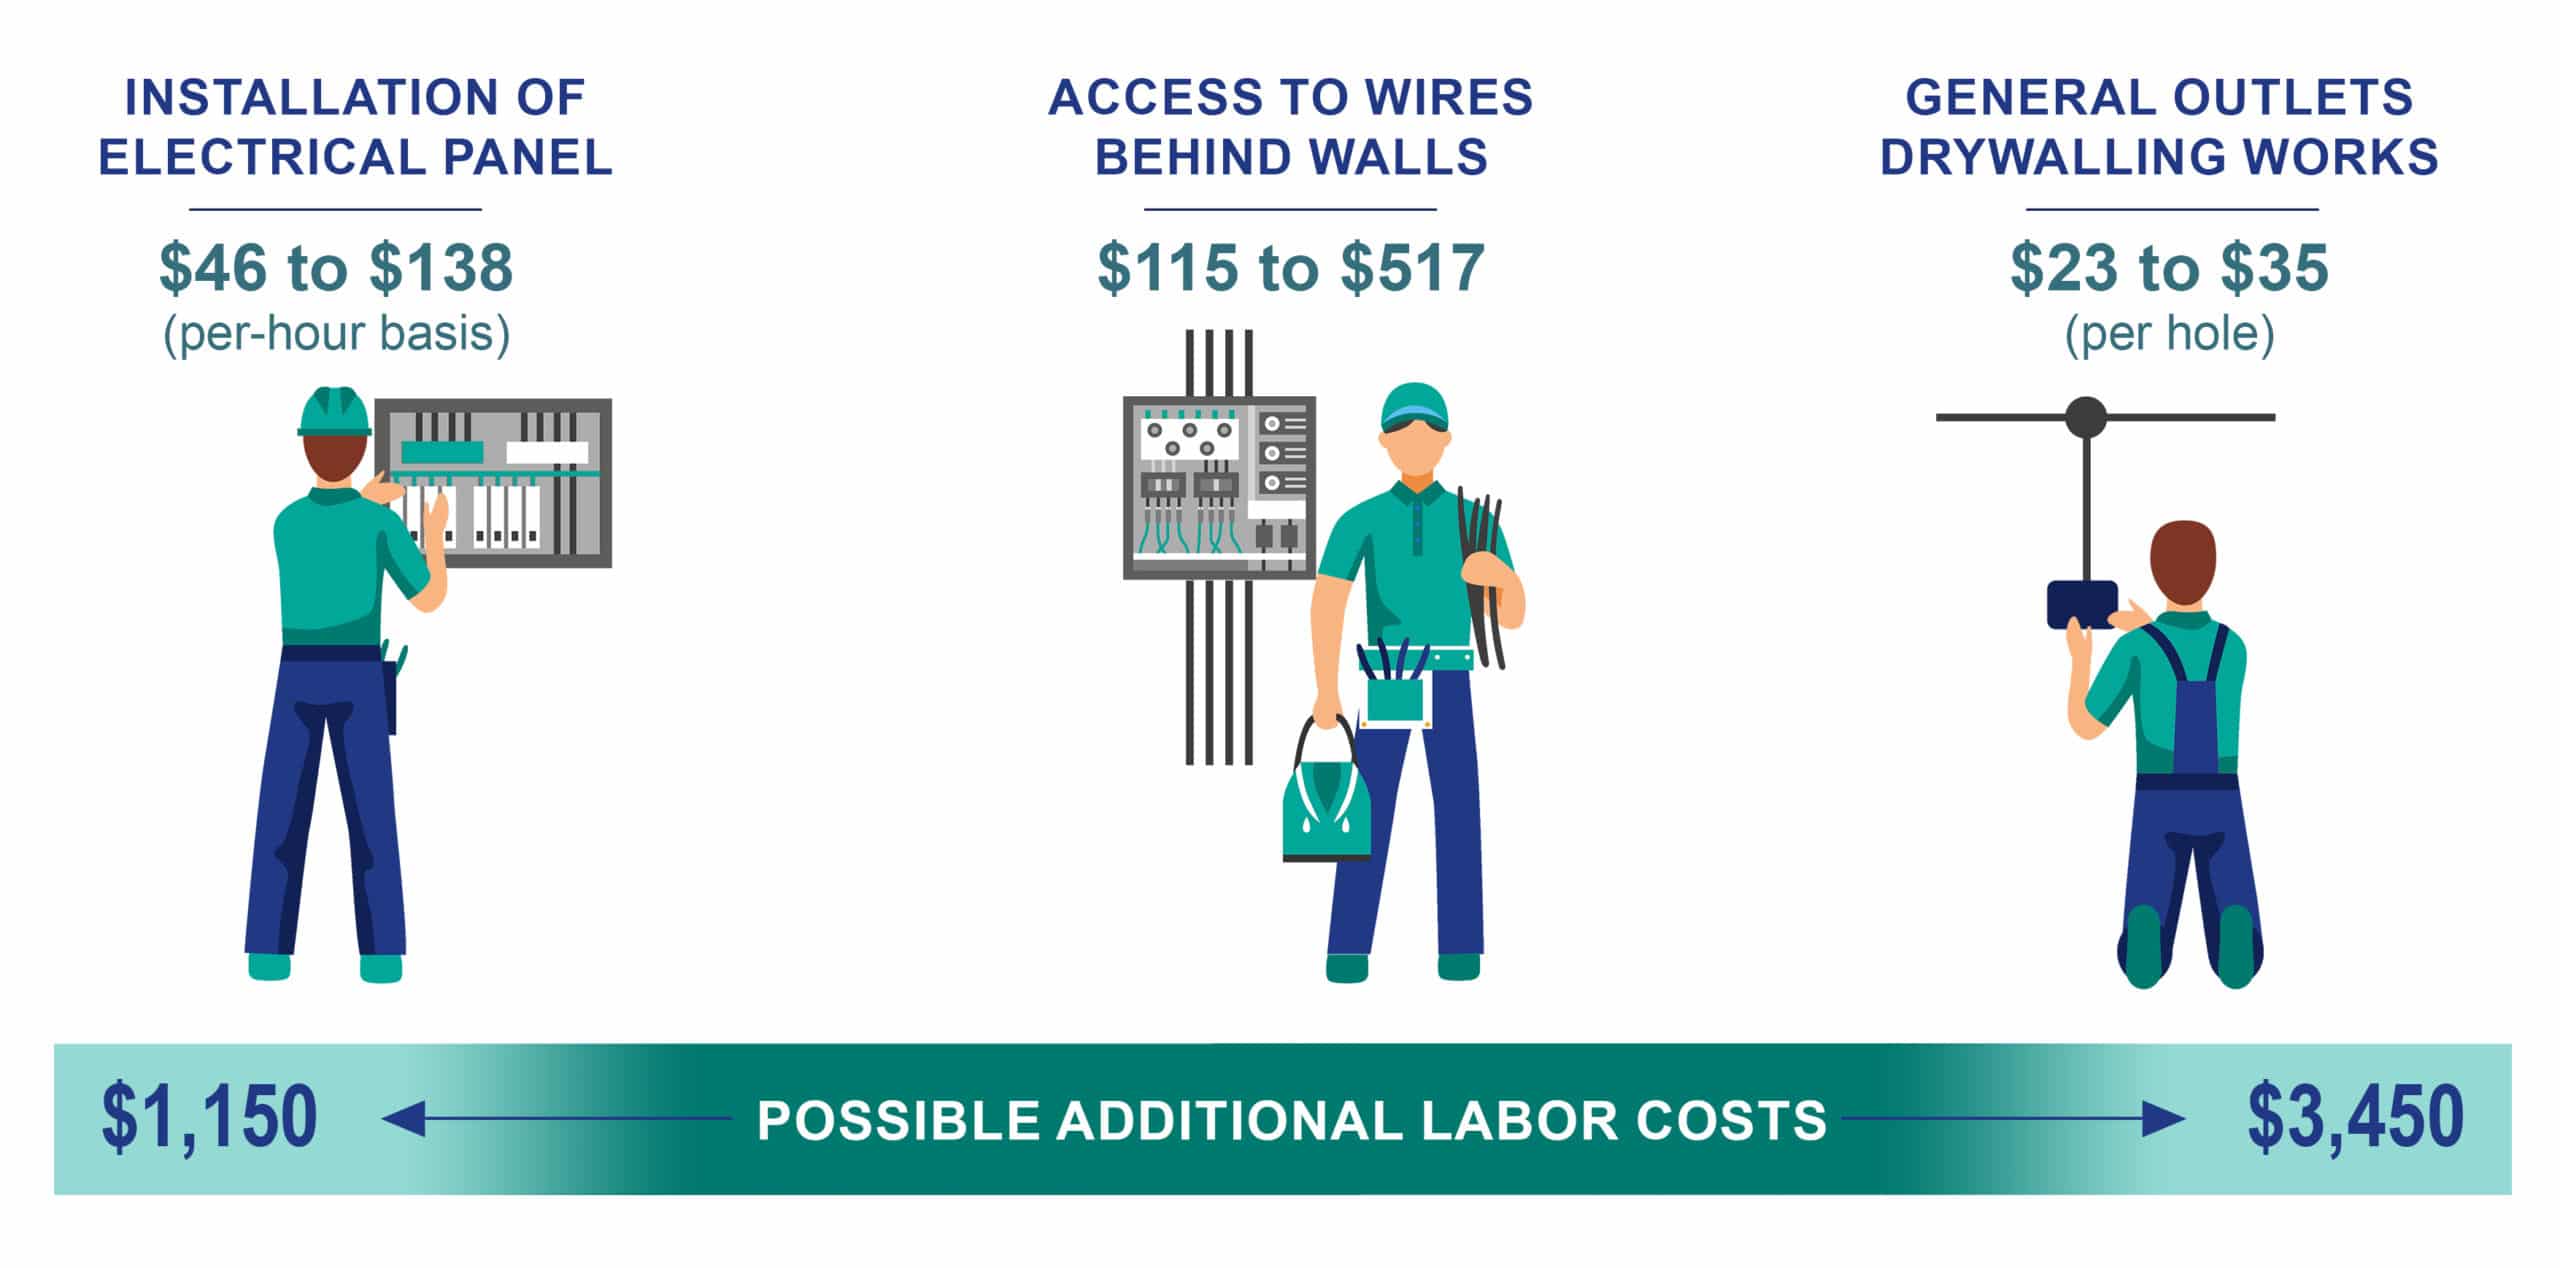 Labor costs for electrical panel installation per hour based on aspect of work.